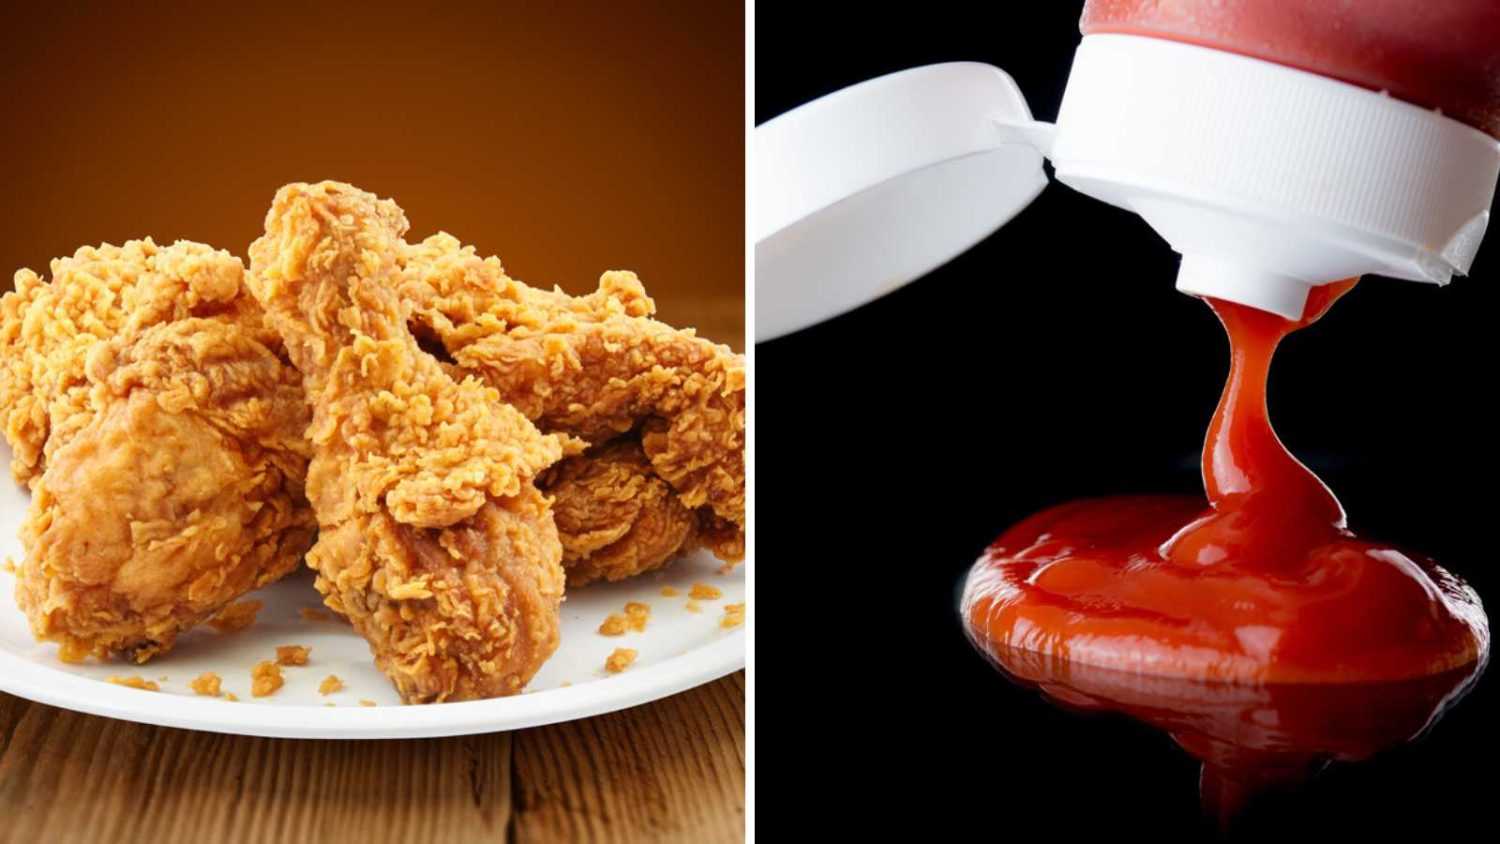 Ketchup and Fried Chicken